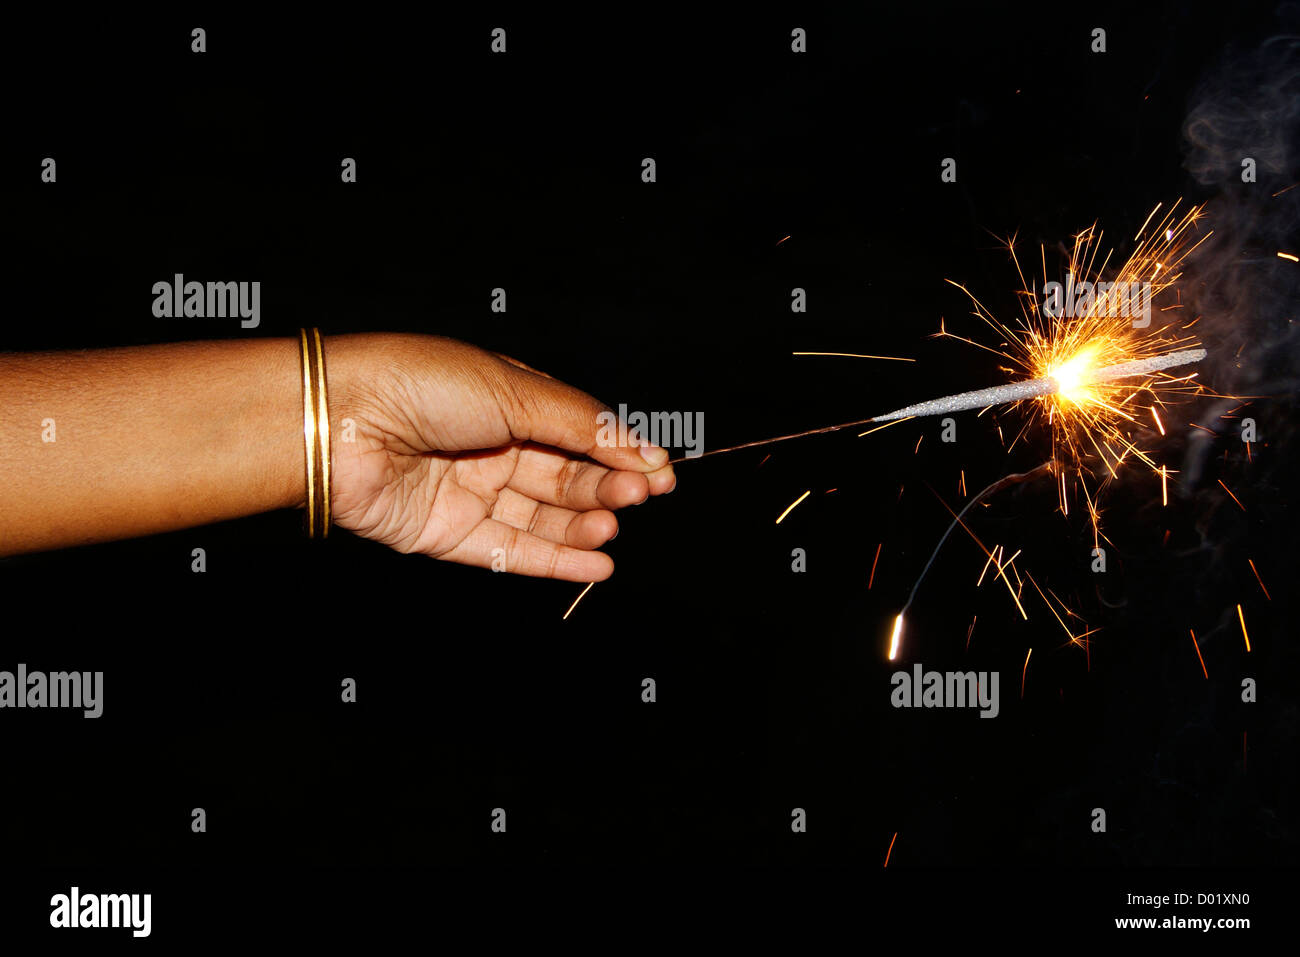 Girl Holding fireworks display Sparker on hands during the occasion of Diwali or Deepavali Festival celebration in India Stock Photo